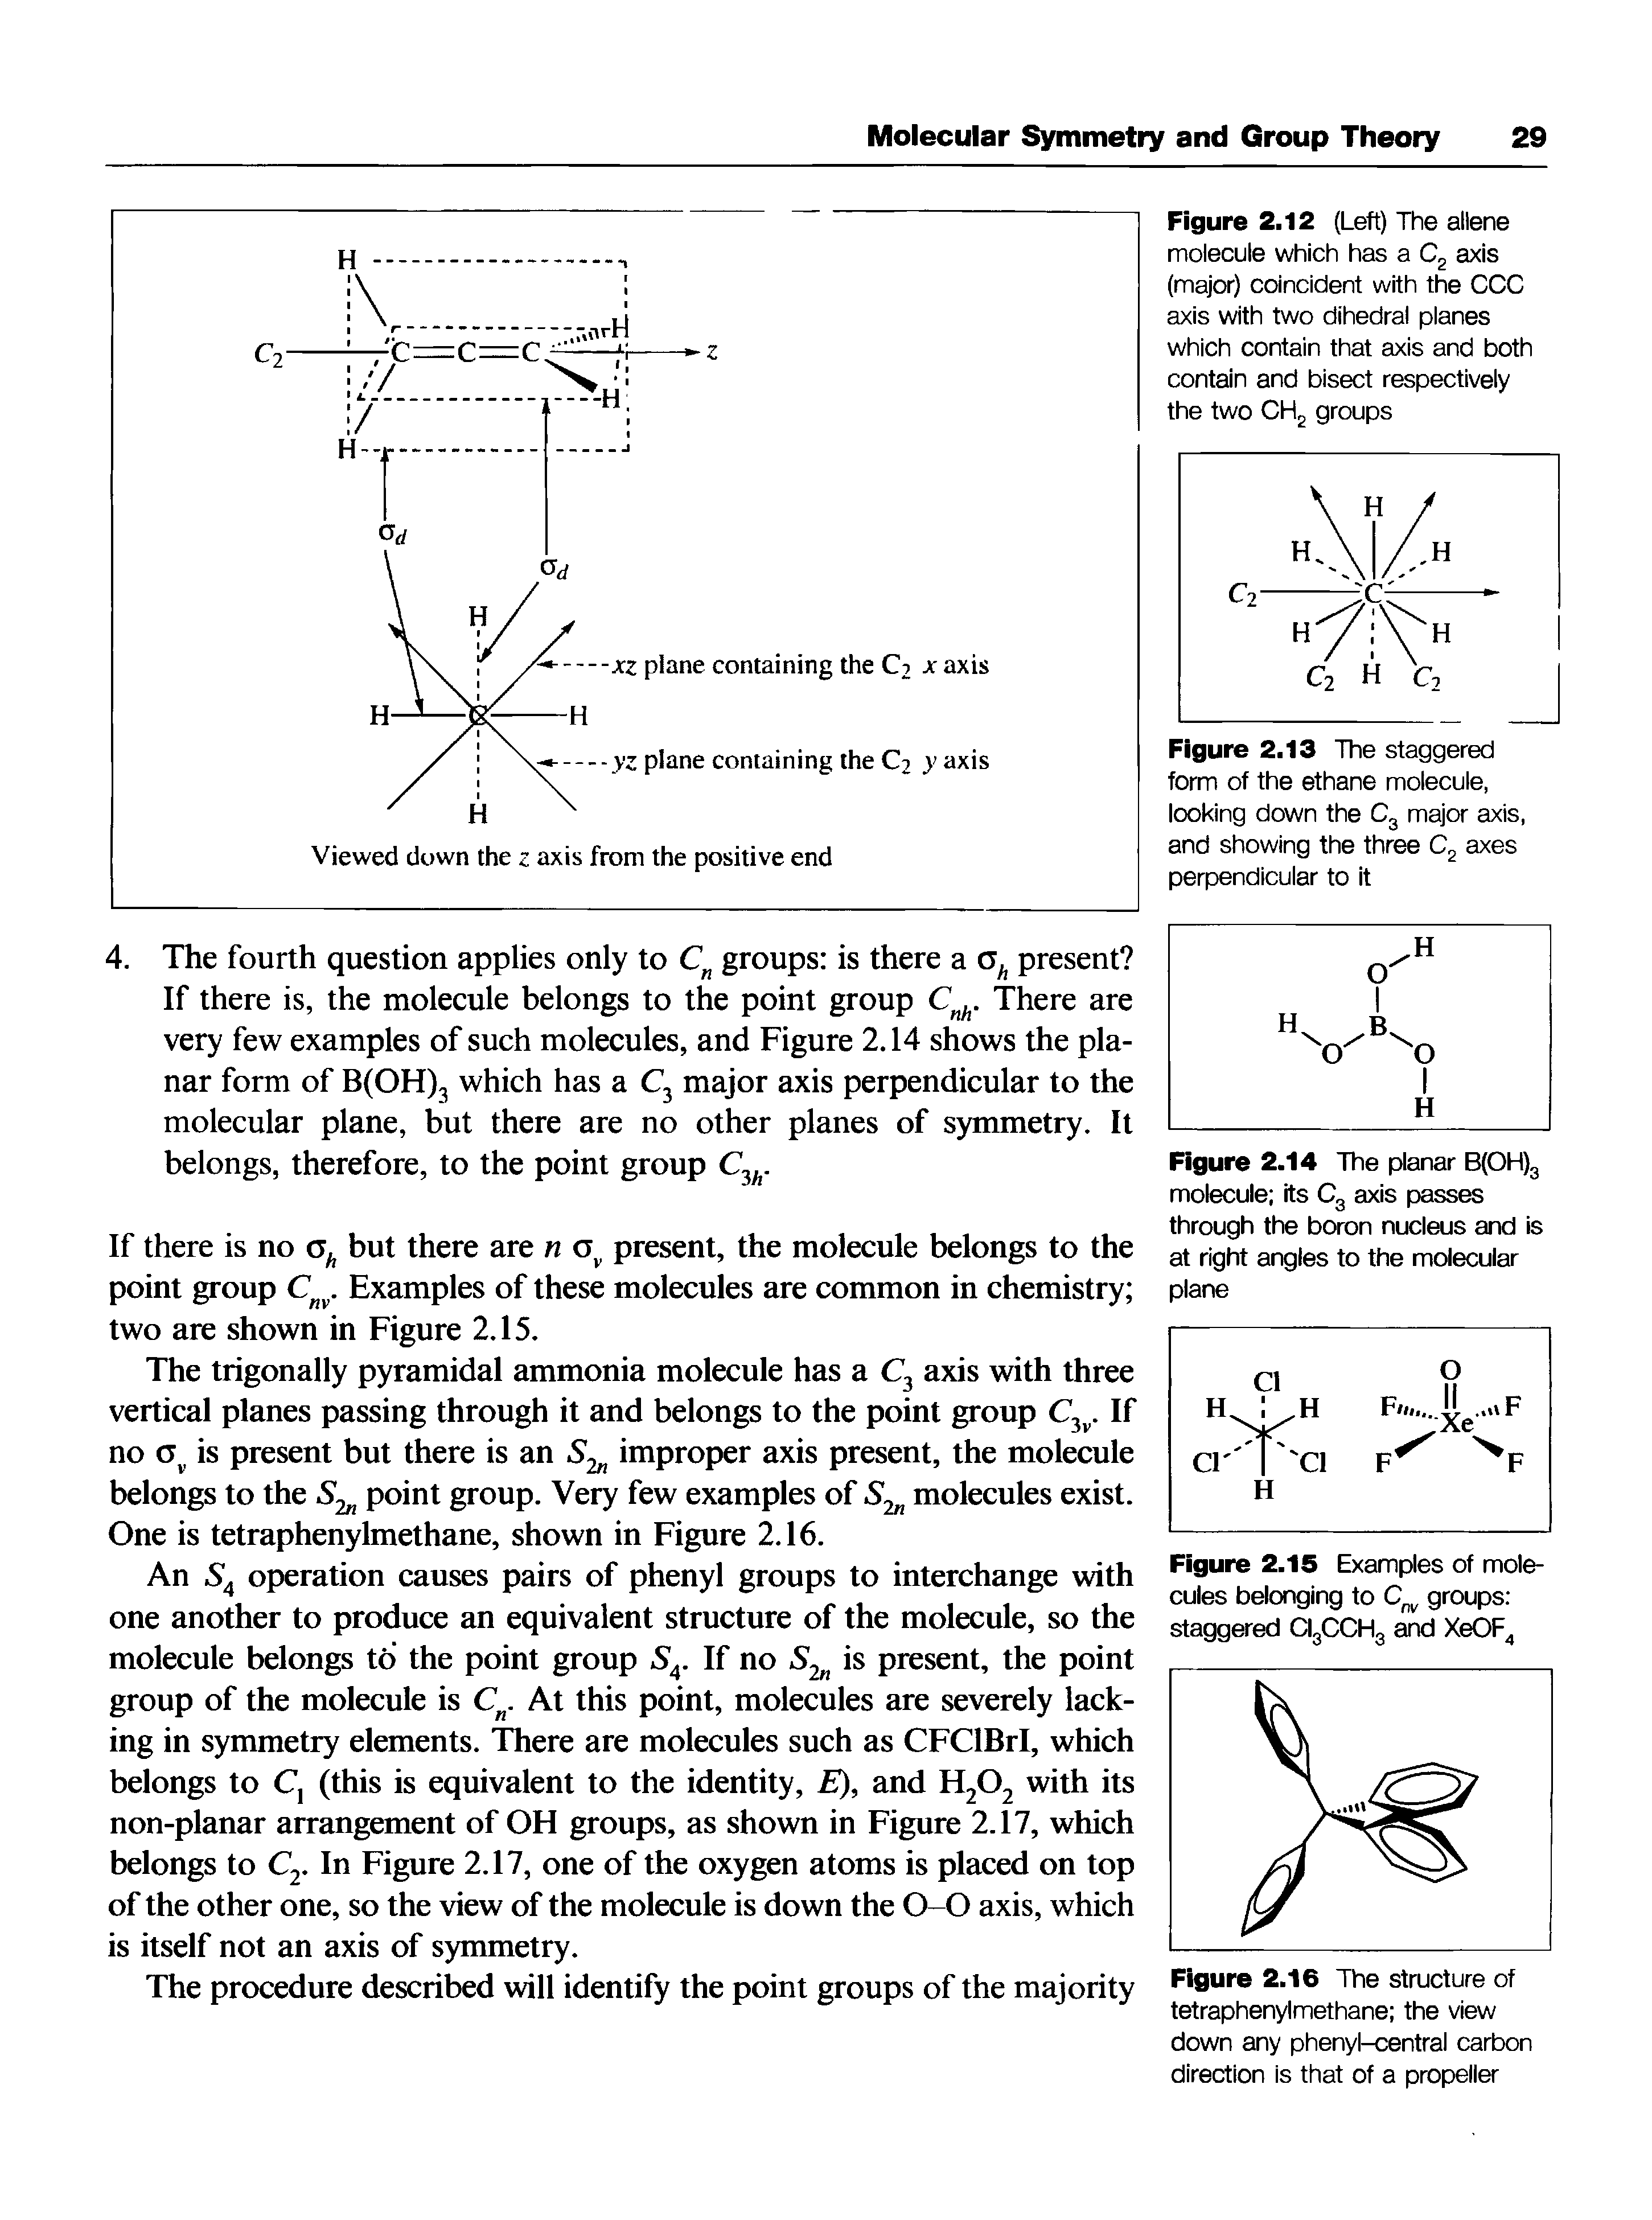 Figure 2.13 The staggered form of the ethane molecule, looking down the C3 major axis, and showing the three C2 axes perpendicular to it...